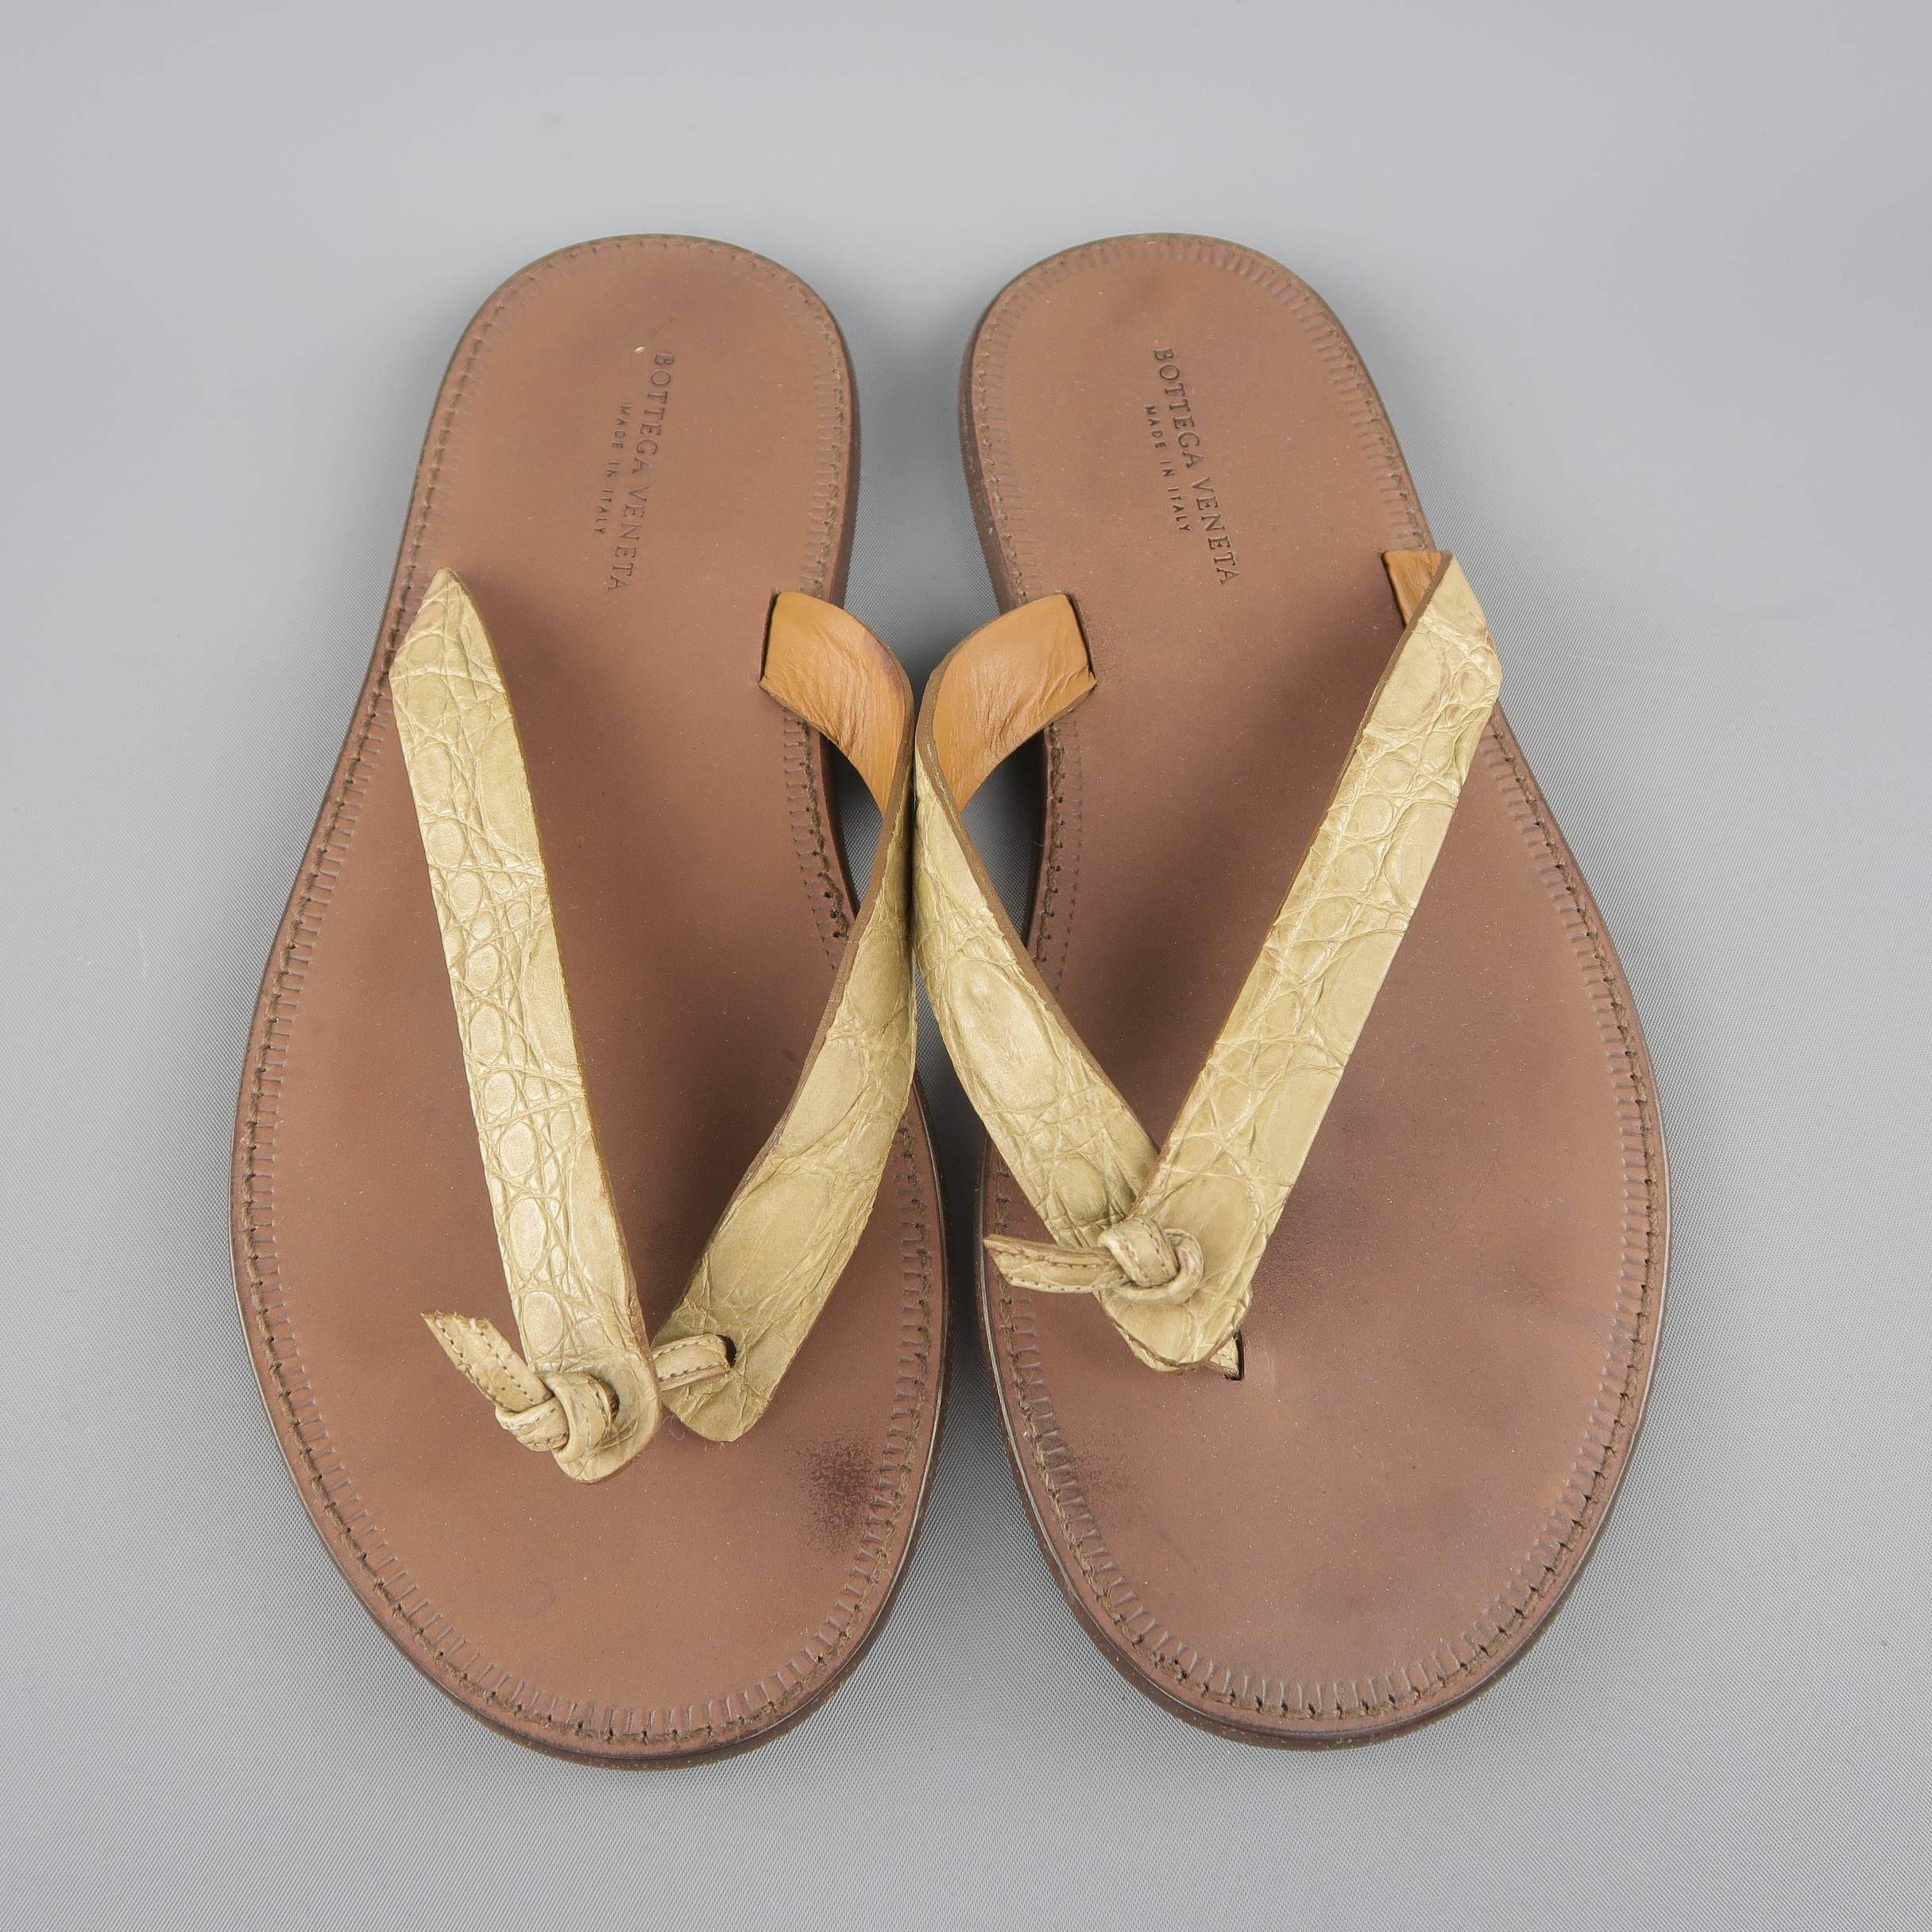 BOTTEGA VENETA sandals feature thick beige alligator embossed leather thong straps with a brown sole. Made in Italy.
 
Good Pre-Owned Condition.
Marked: IT 41
 
Outsole: 11 x 4 in.
